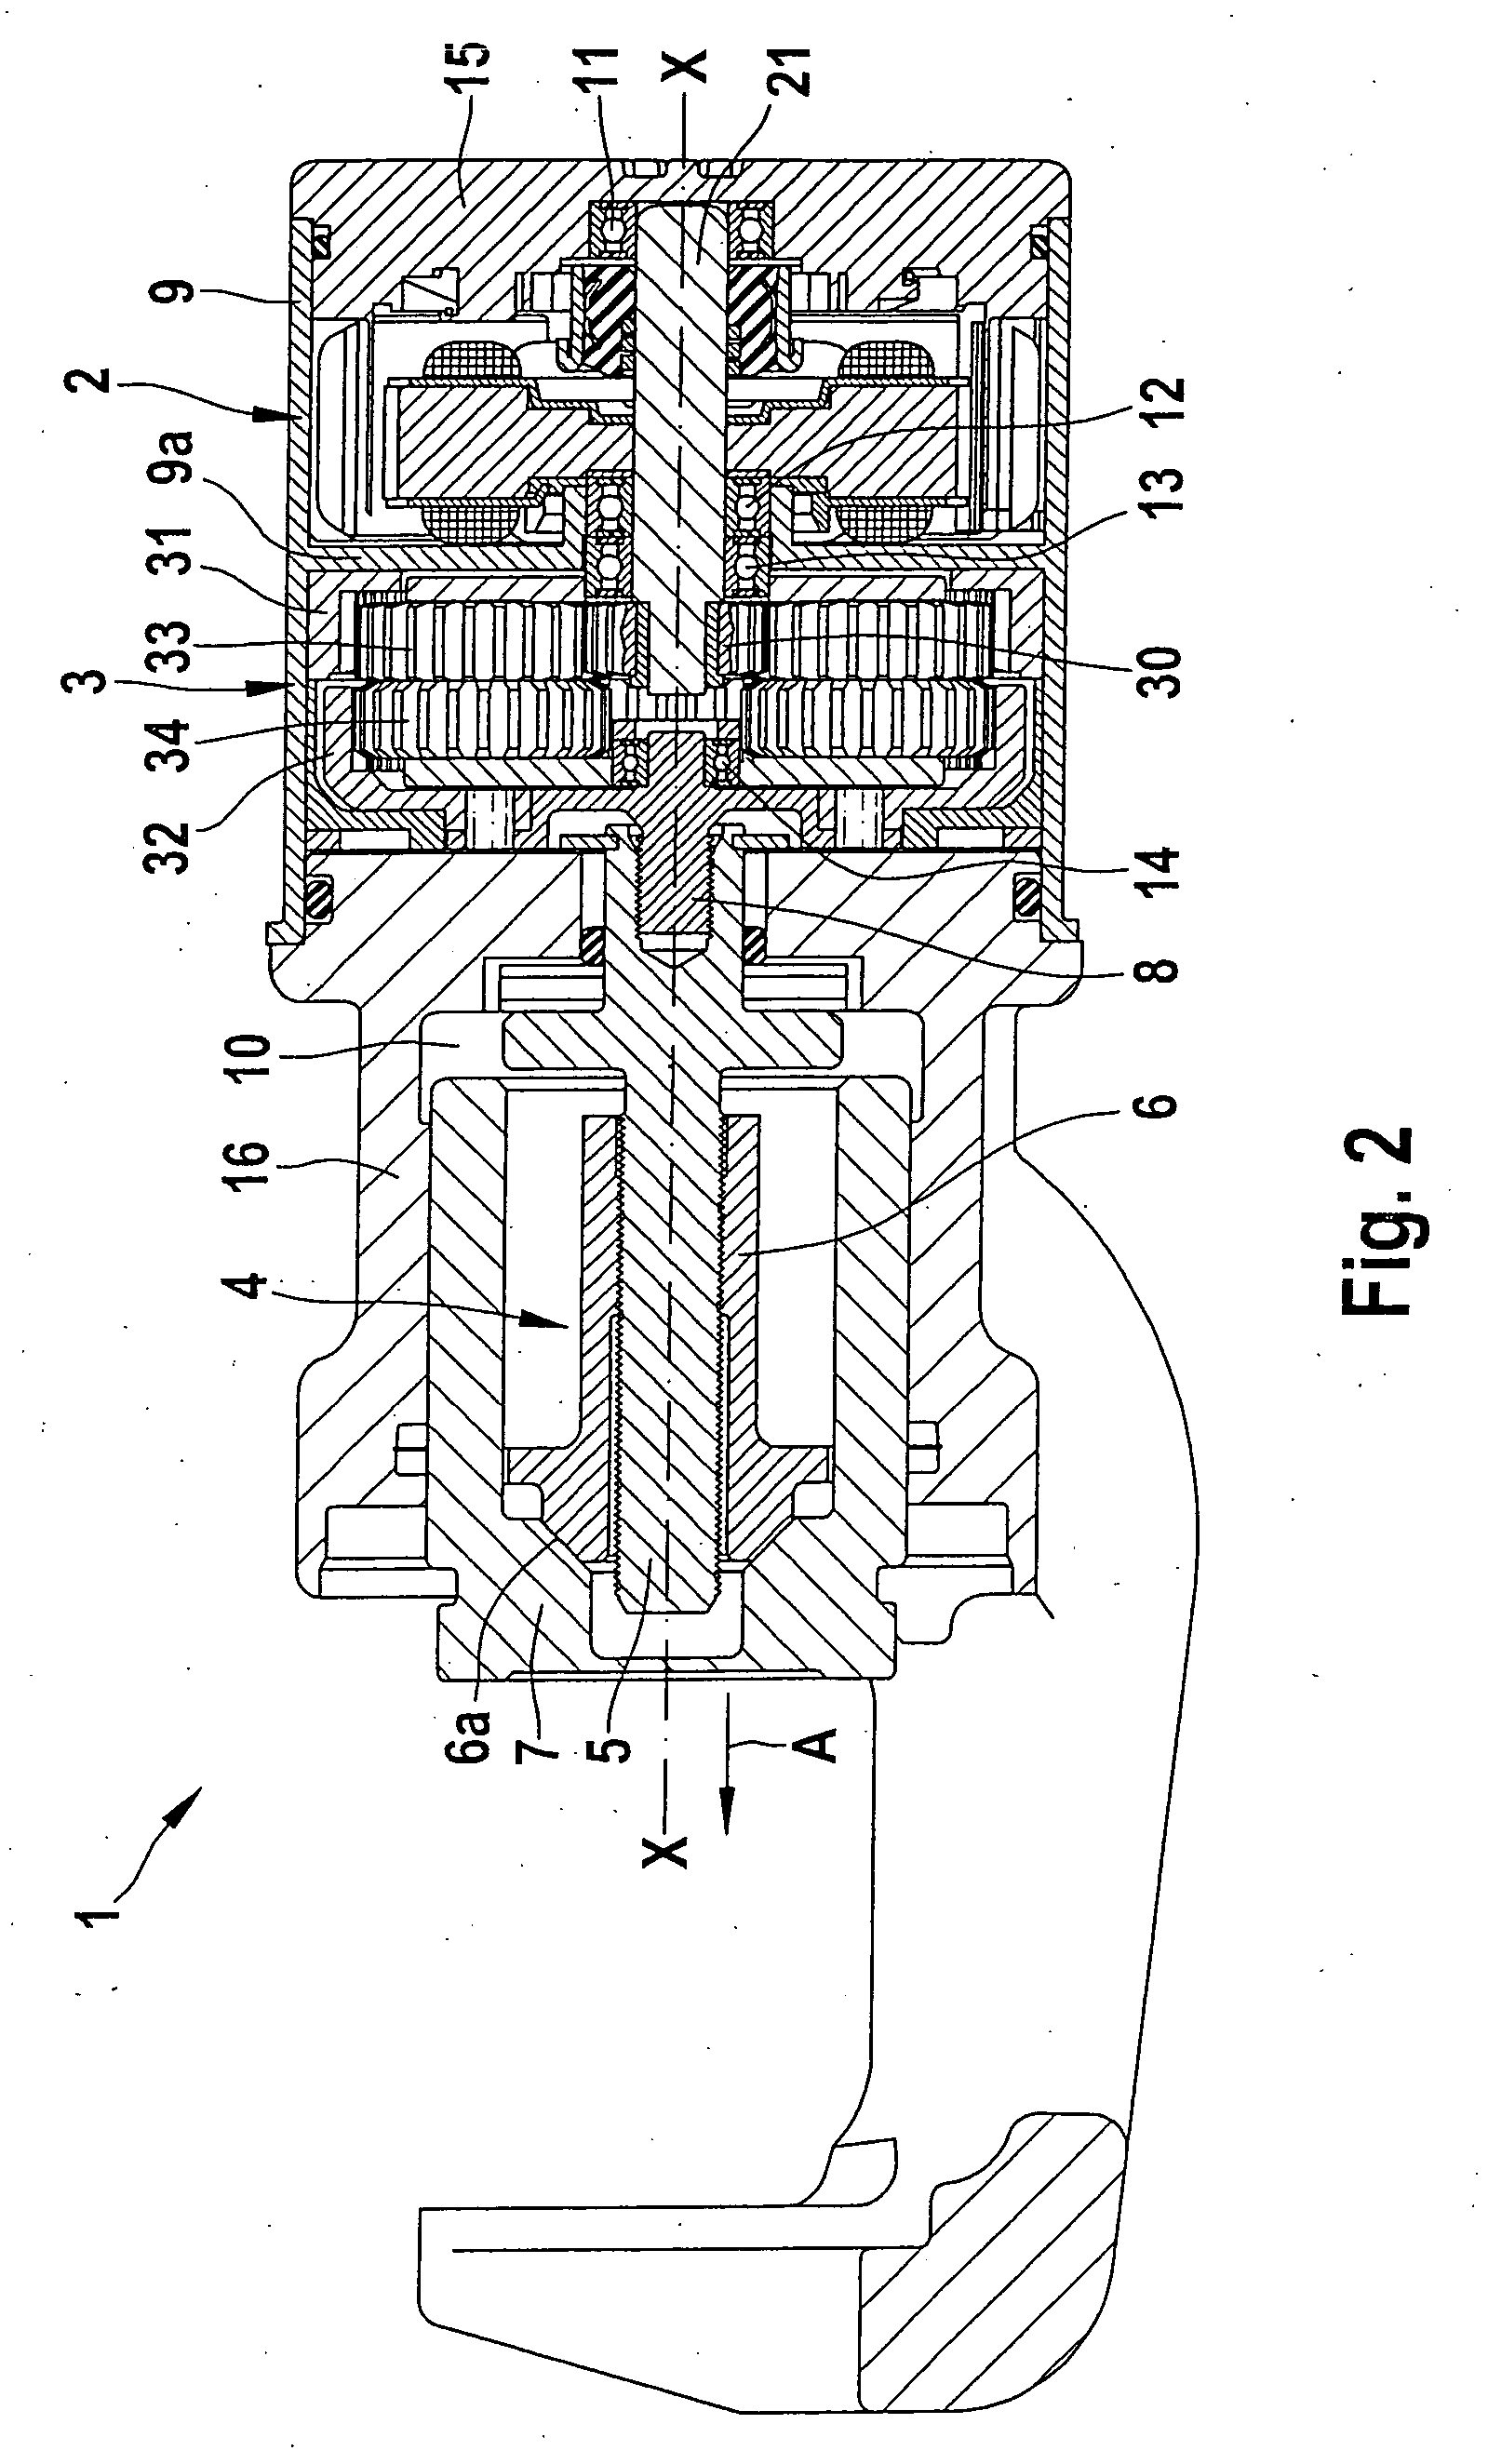 Combined service and parking brake apparatus and method for executing an emergency braking action